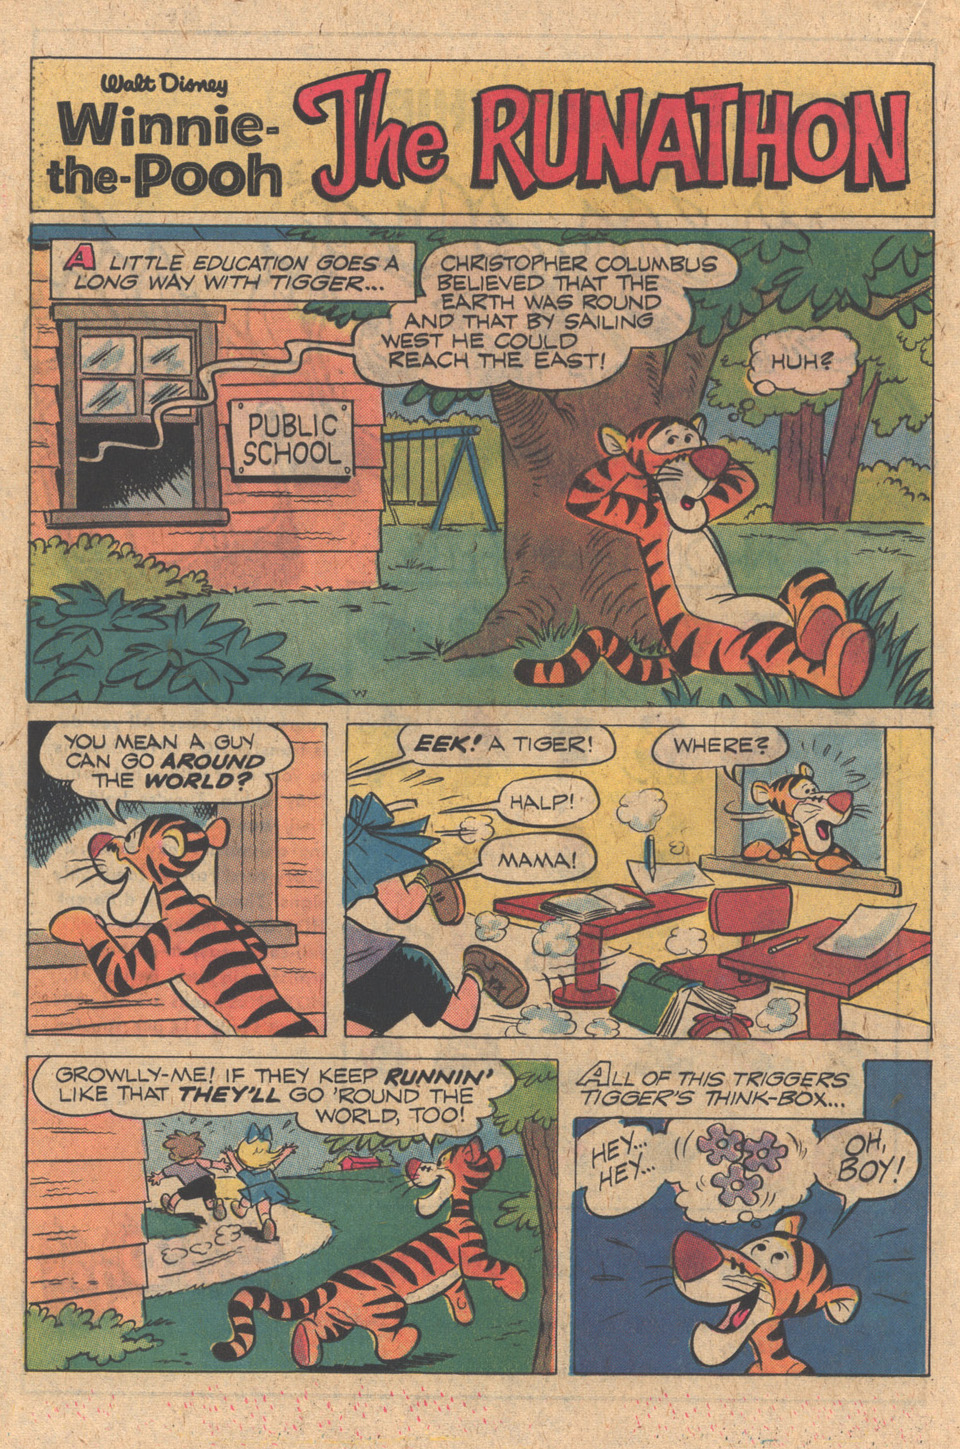 Read online Winnie-the-Pooh comic -  Issue #4 - 20